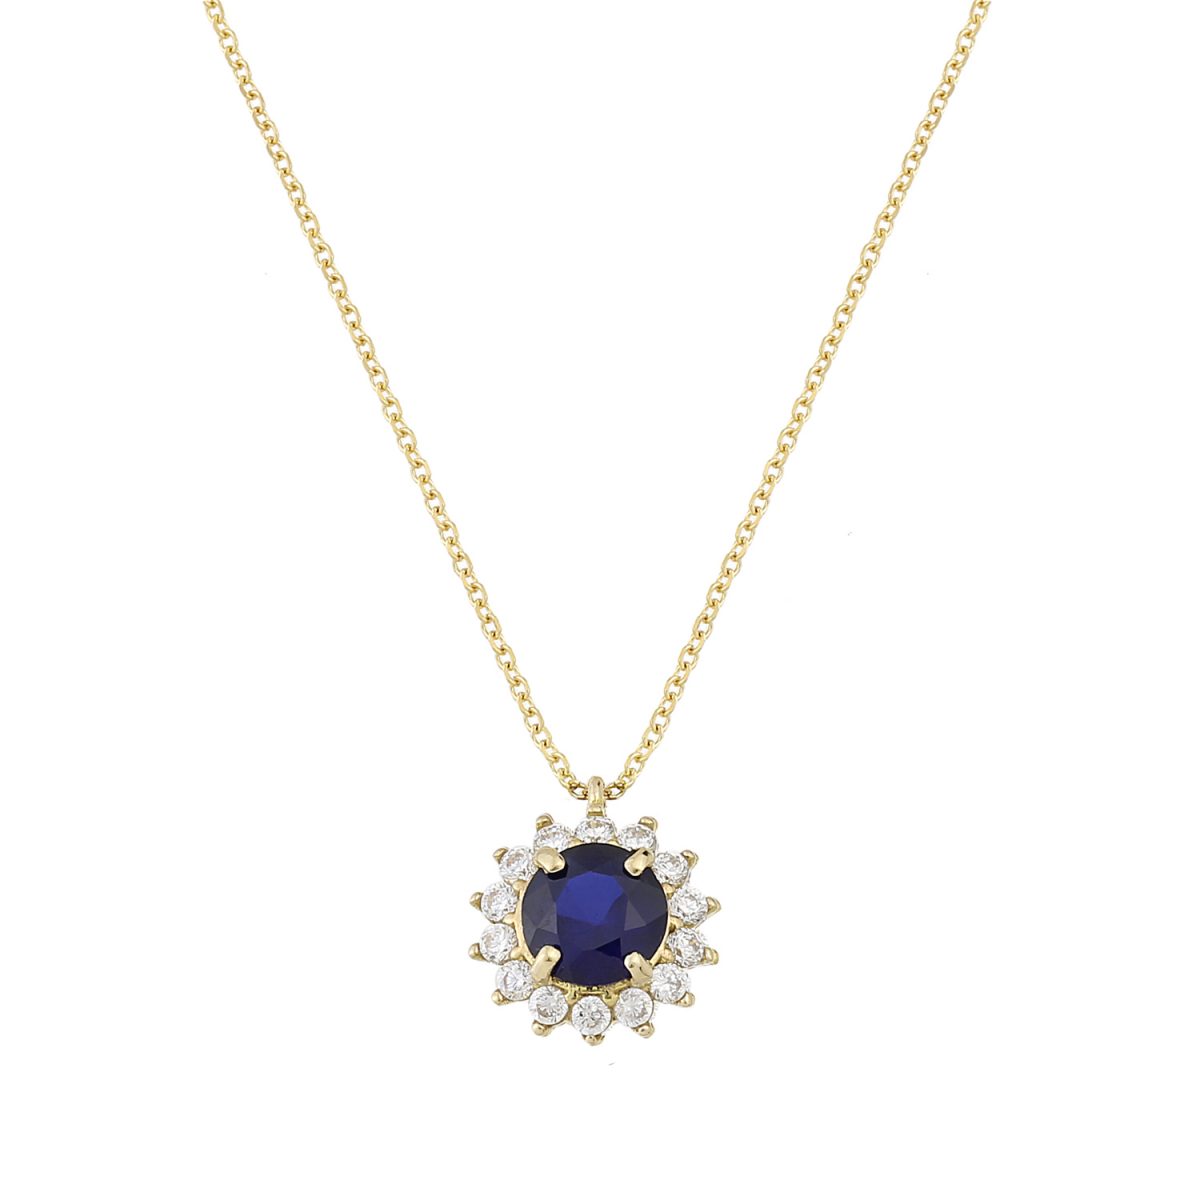 Rosette necklace with Blue stone